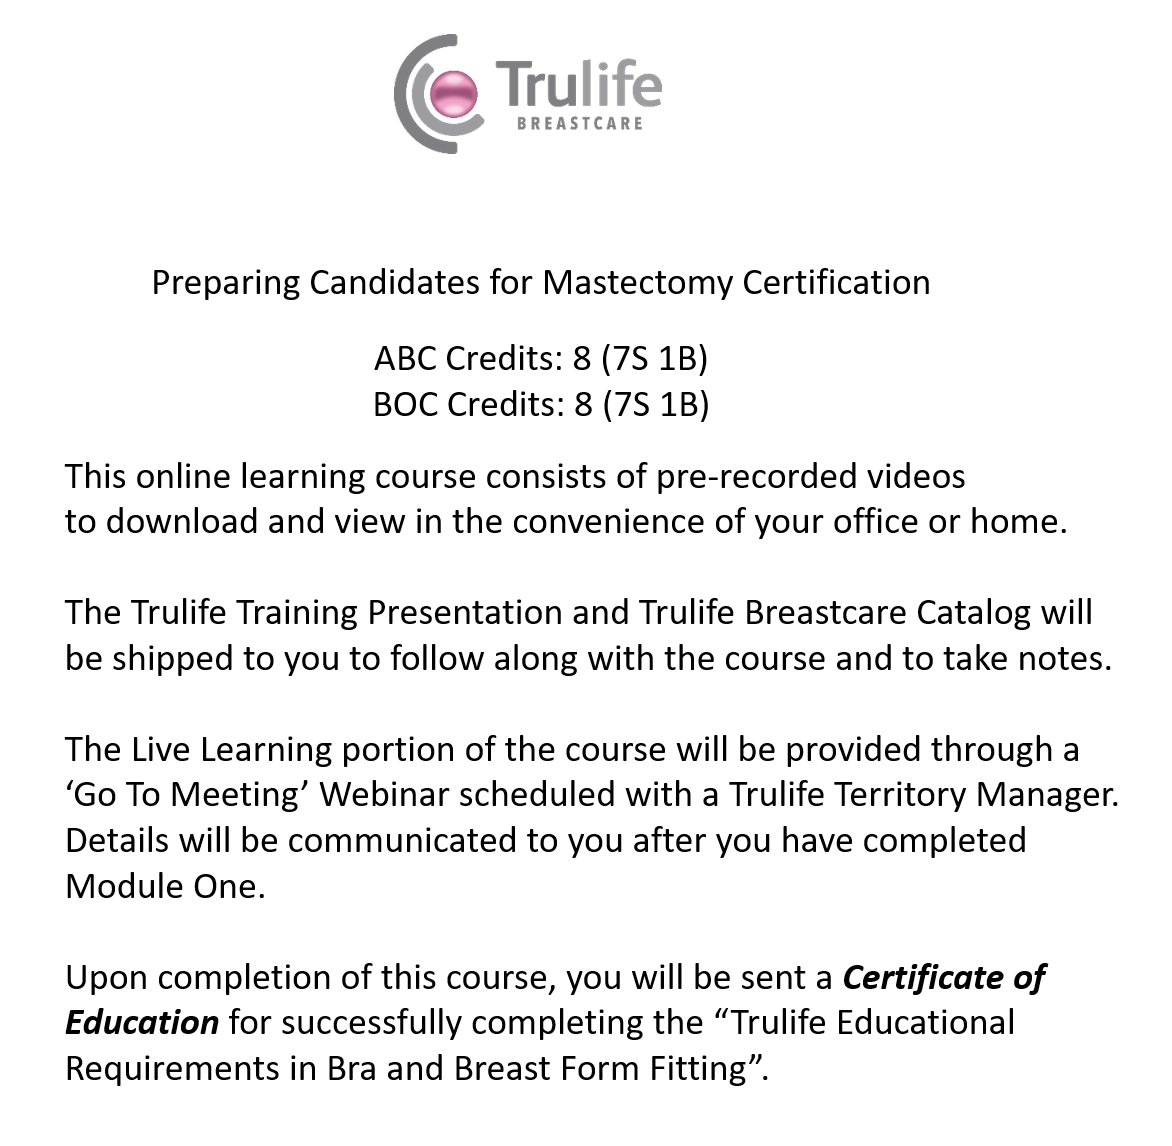 Trulife Breastcare Fitter Training